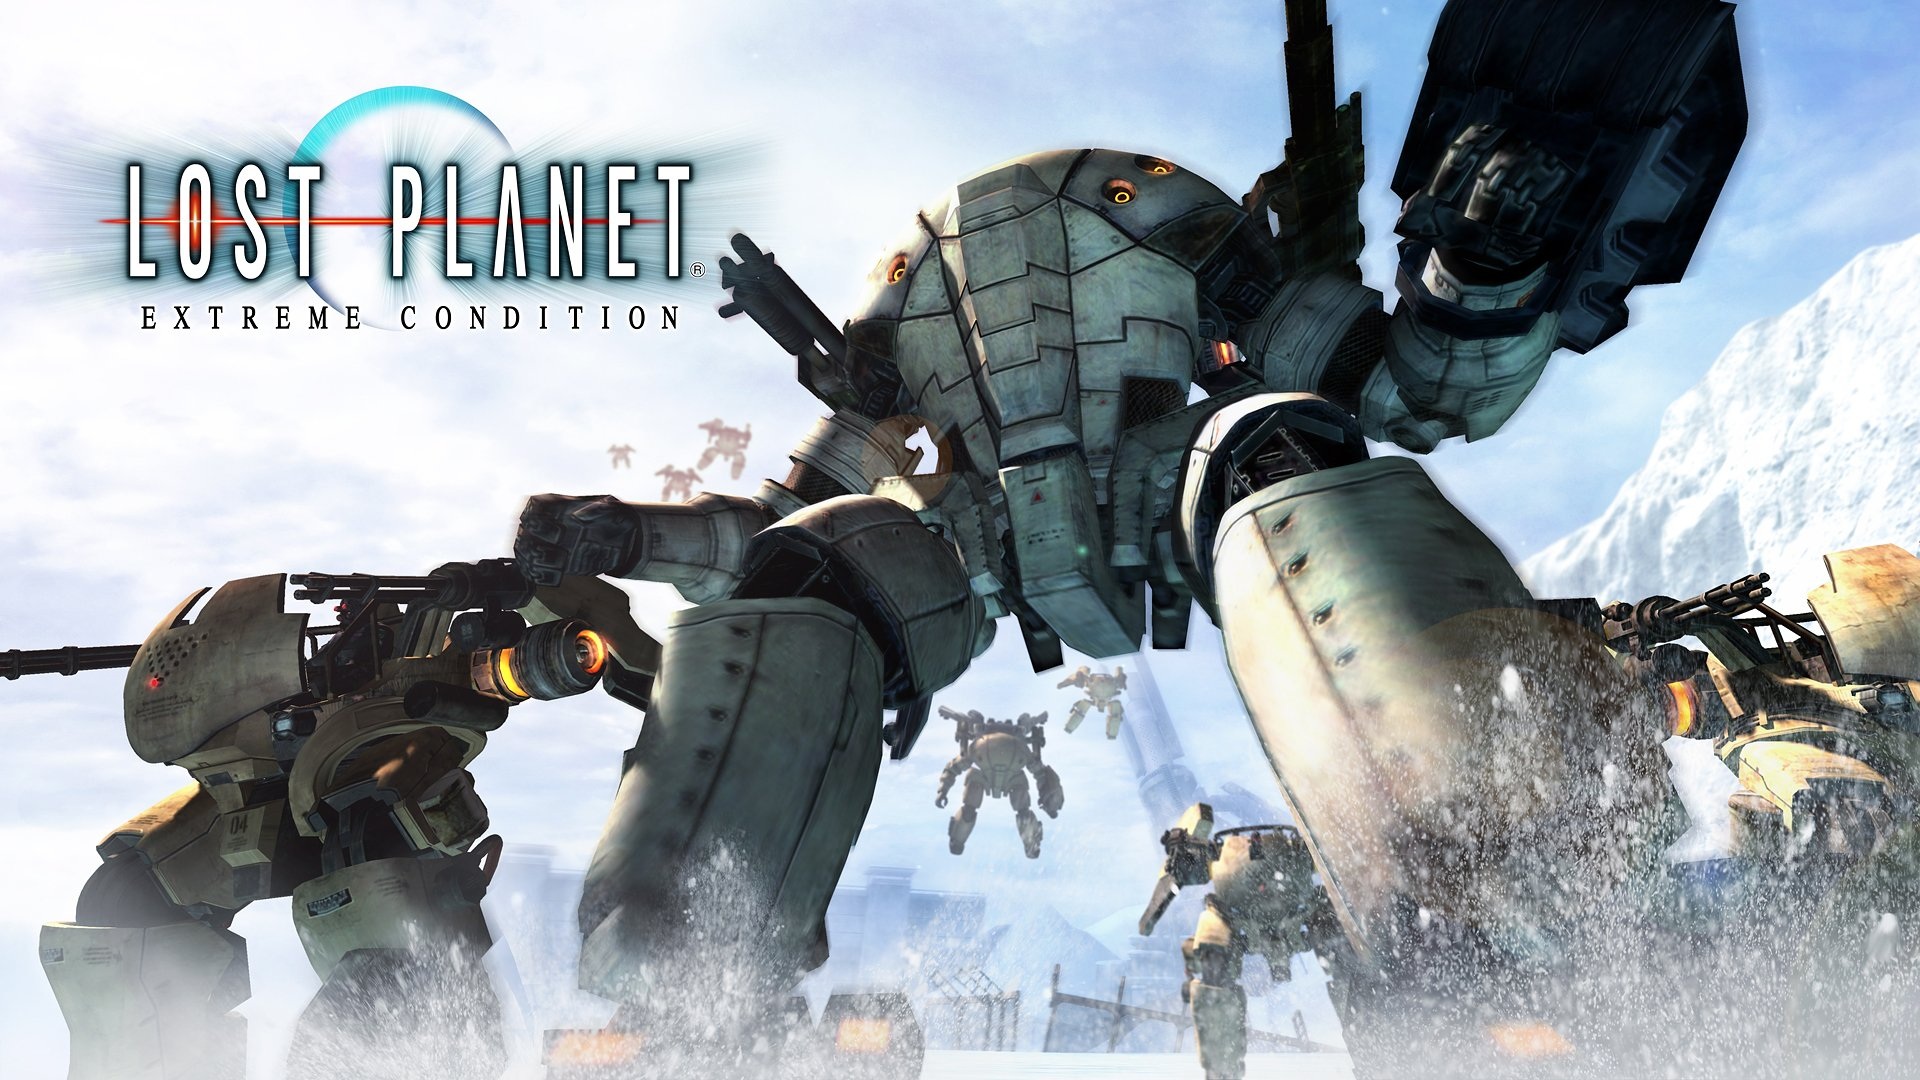 Wallpaper Lost Planet - Lost Planet Extreme Condition - HD Wallpaper 